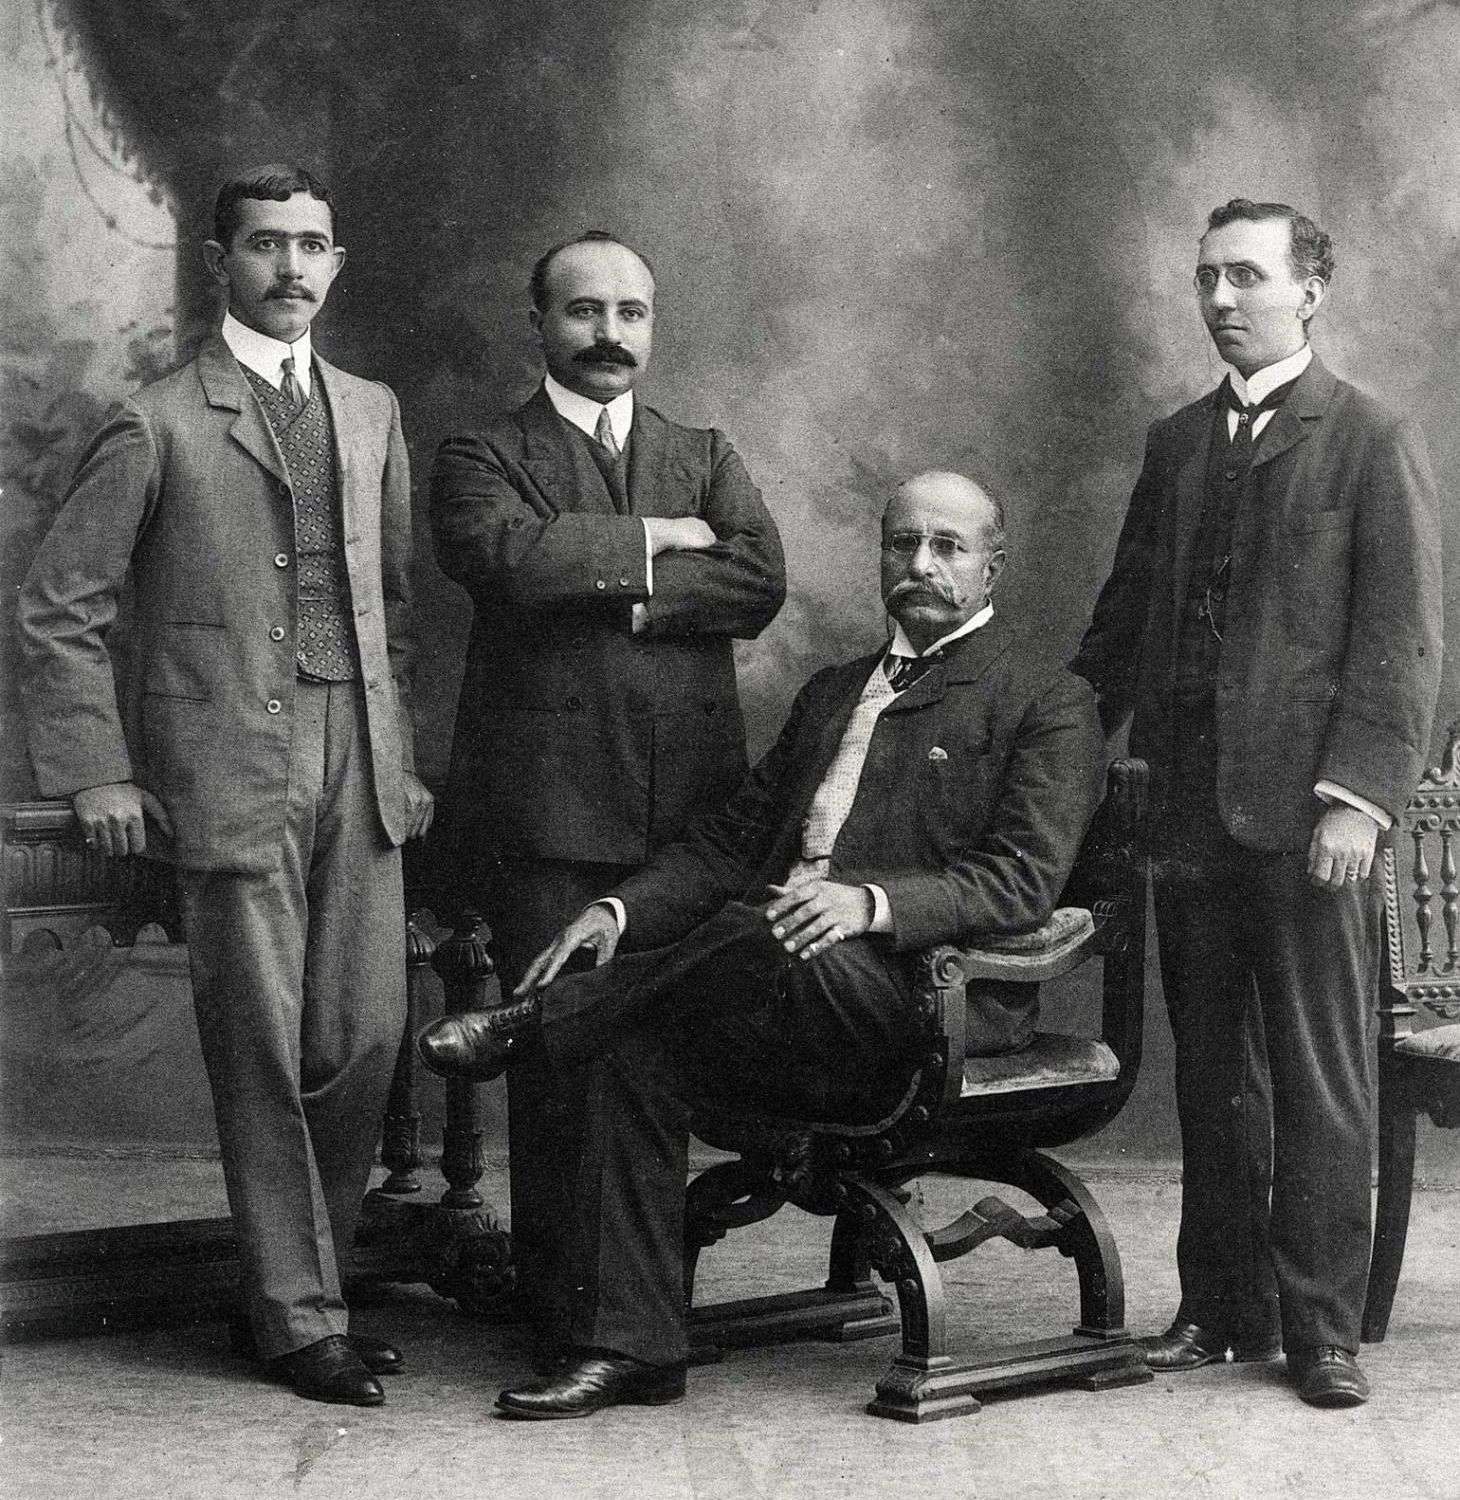 Martin Sarkies (seated) with his manager Joe Constantine (left),his brother Arshak and Martyrose Arathoon, a Sarkies partner (right).